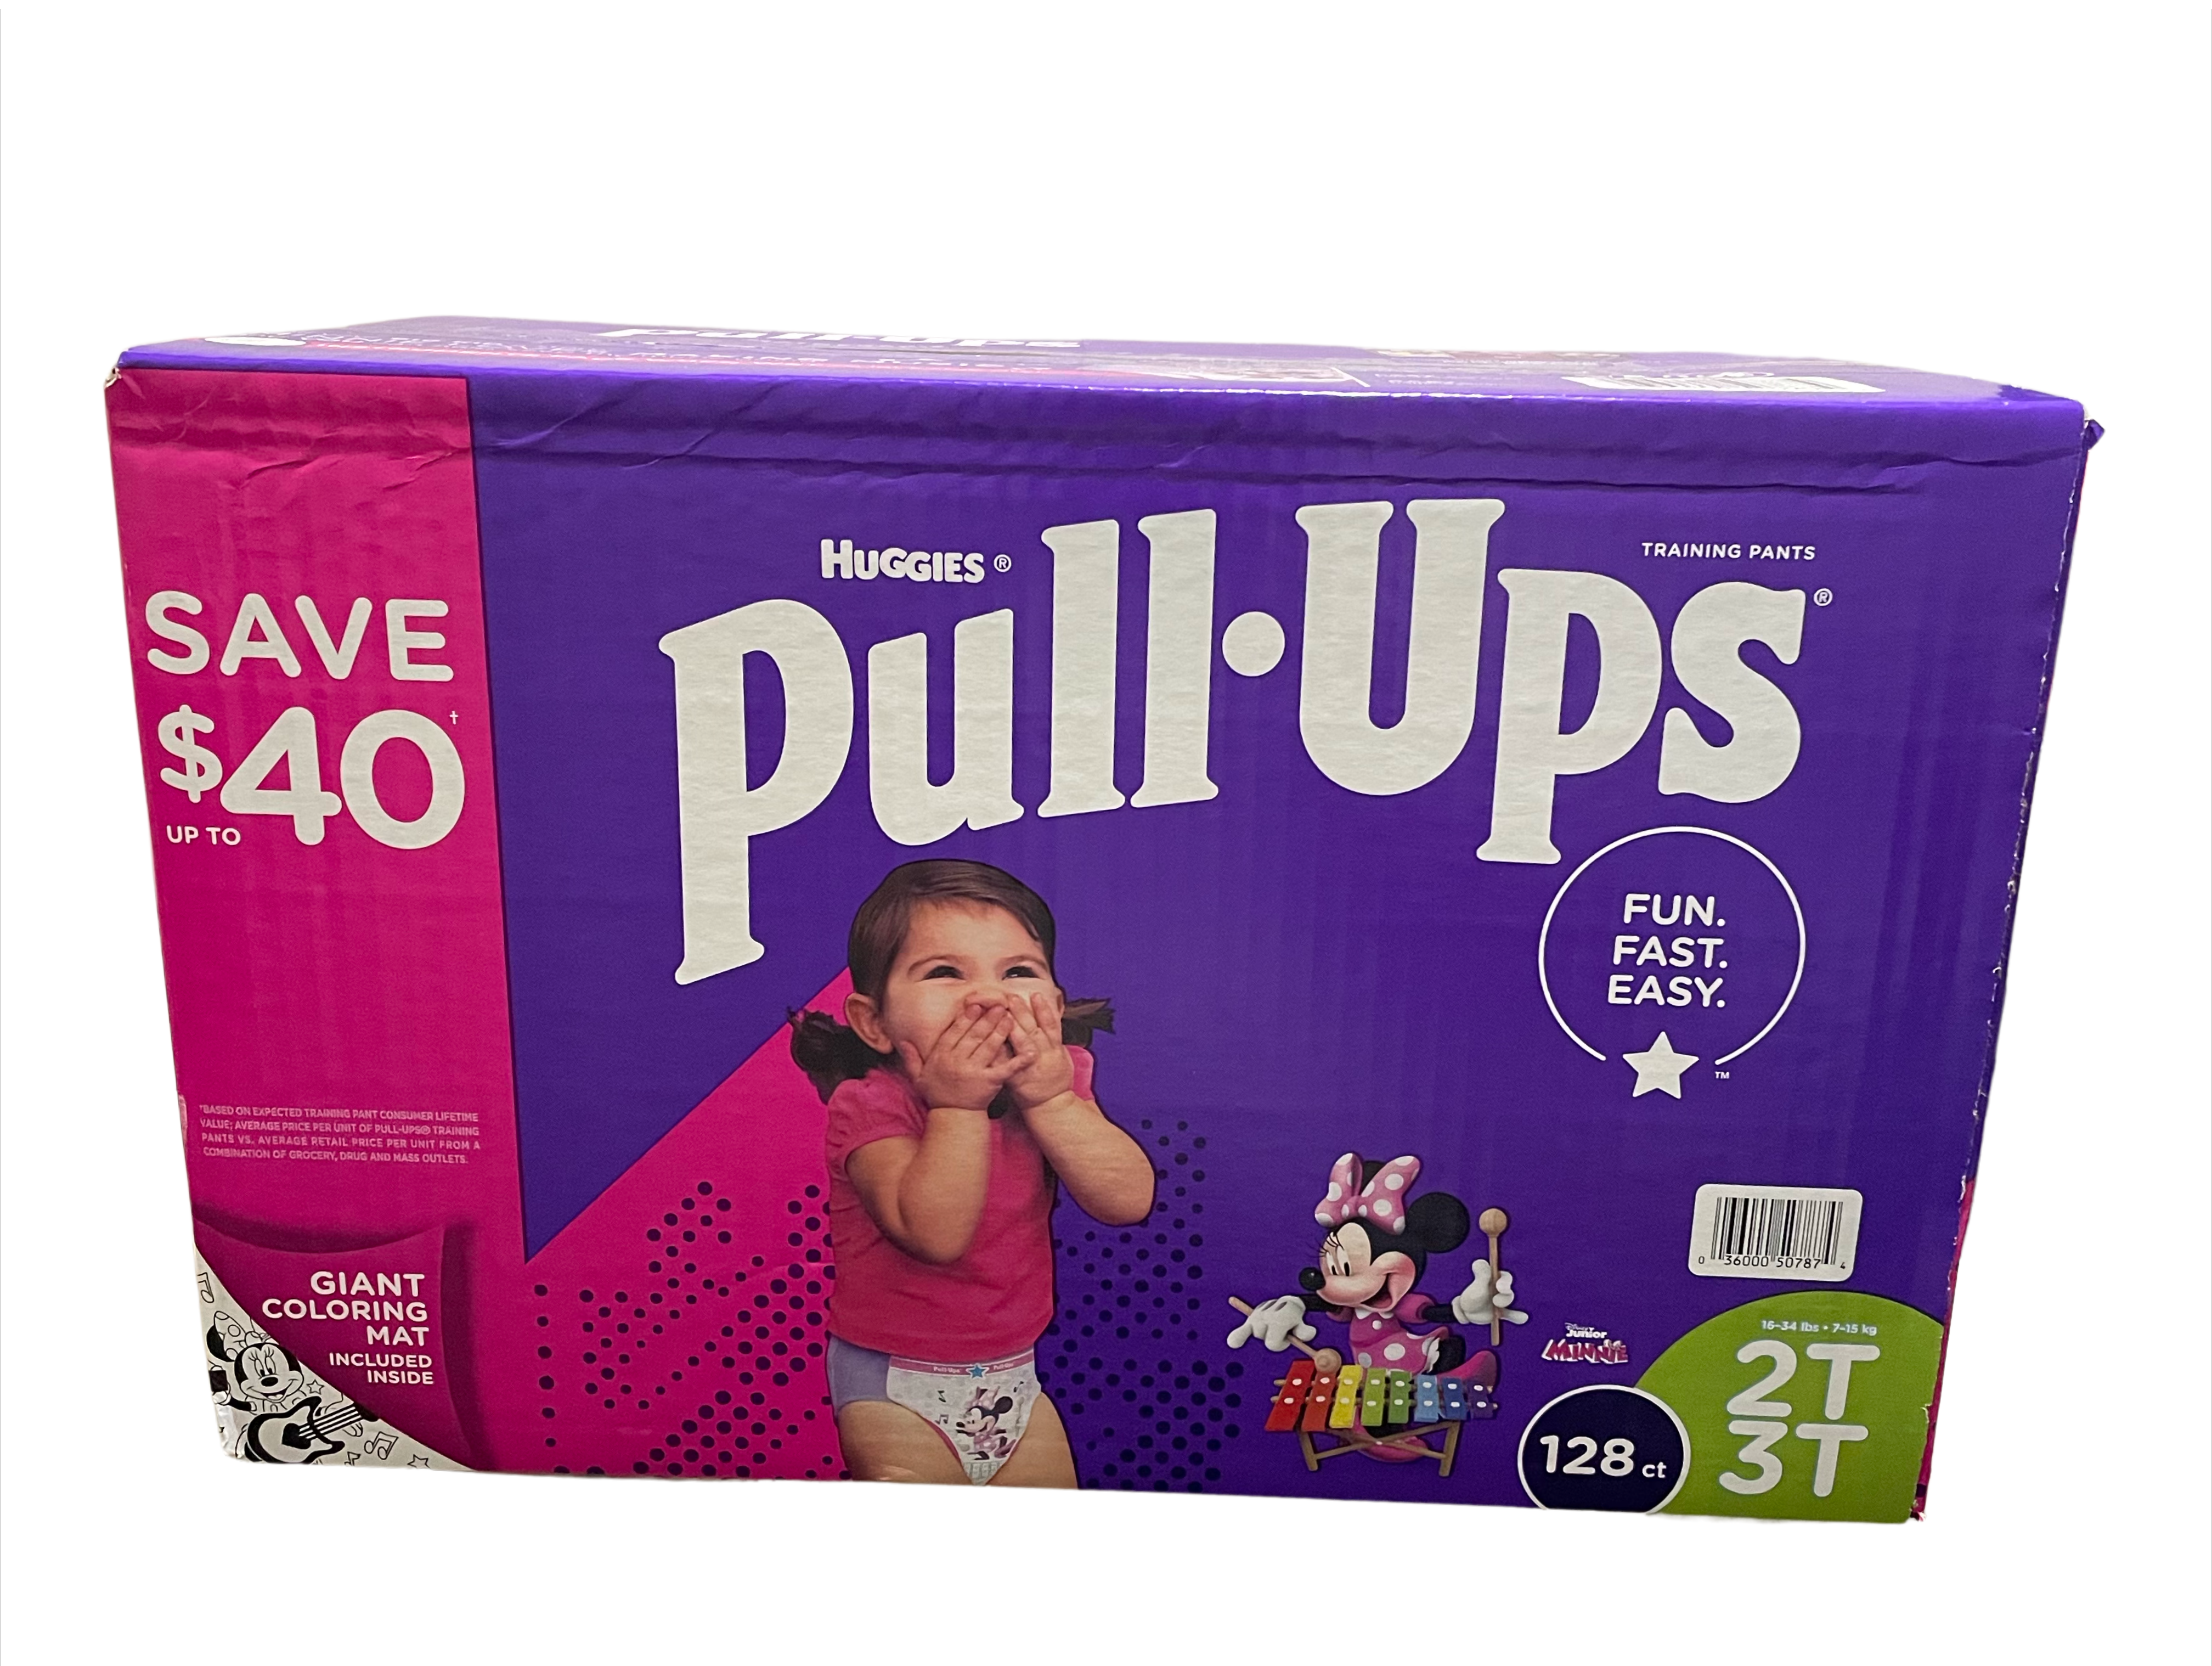 Huggies Pull-Ups Training Pants with Cool Alert for Girls, Size 2T